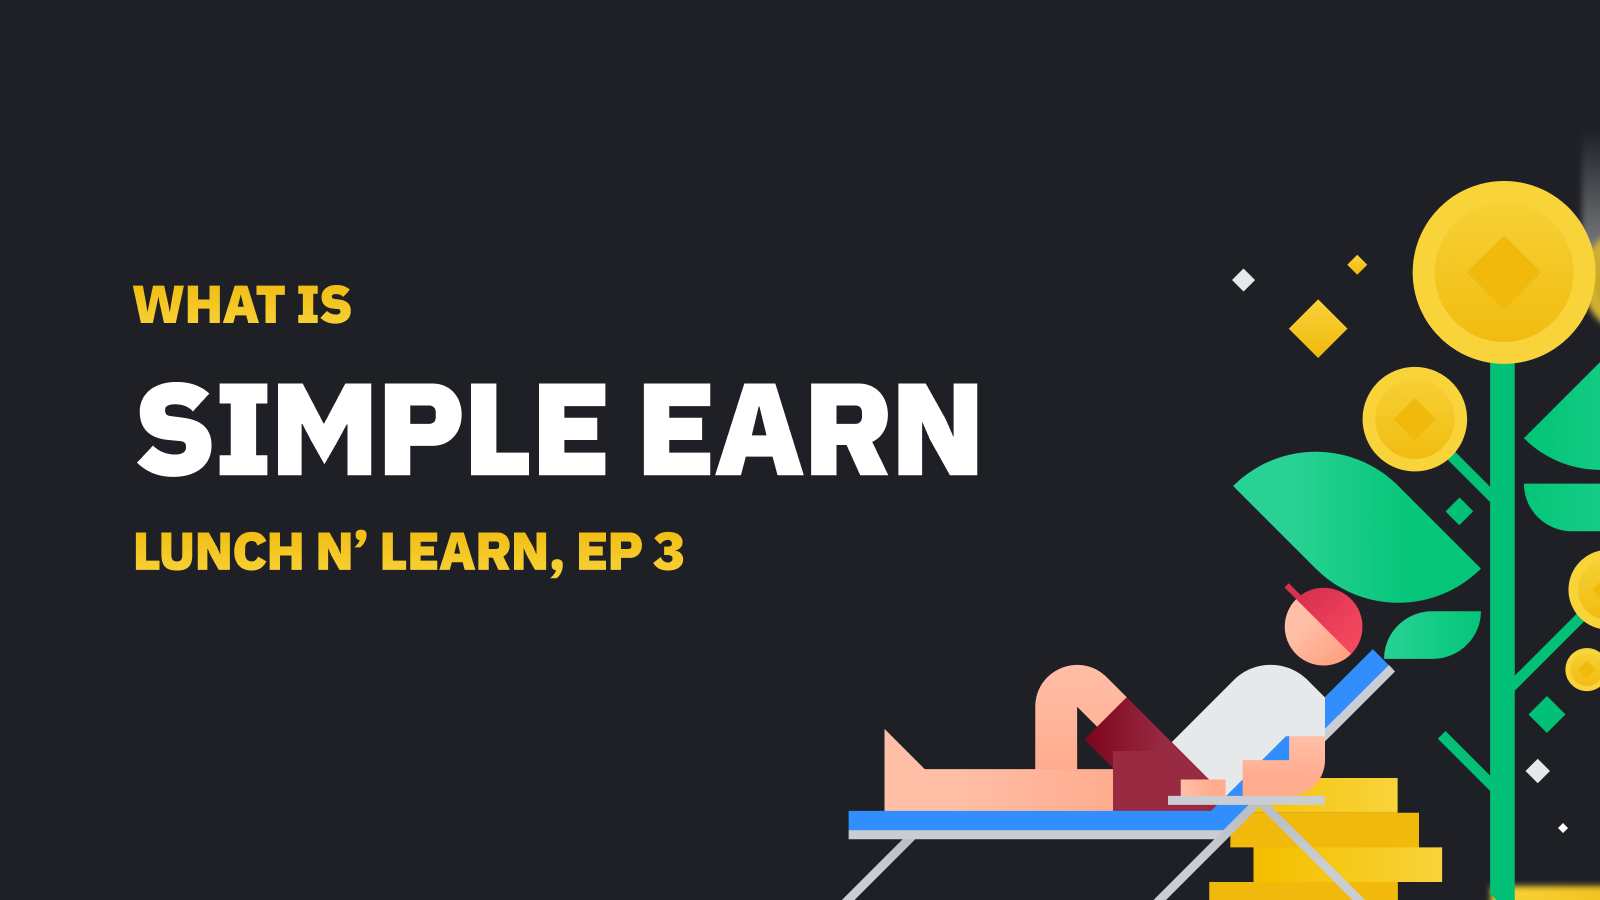 What is Simple Earn? | Lunch n' Learn with Binance | Episode 3